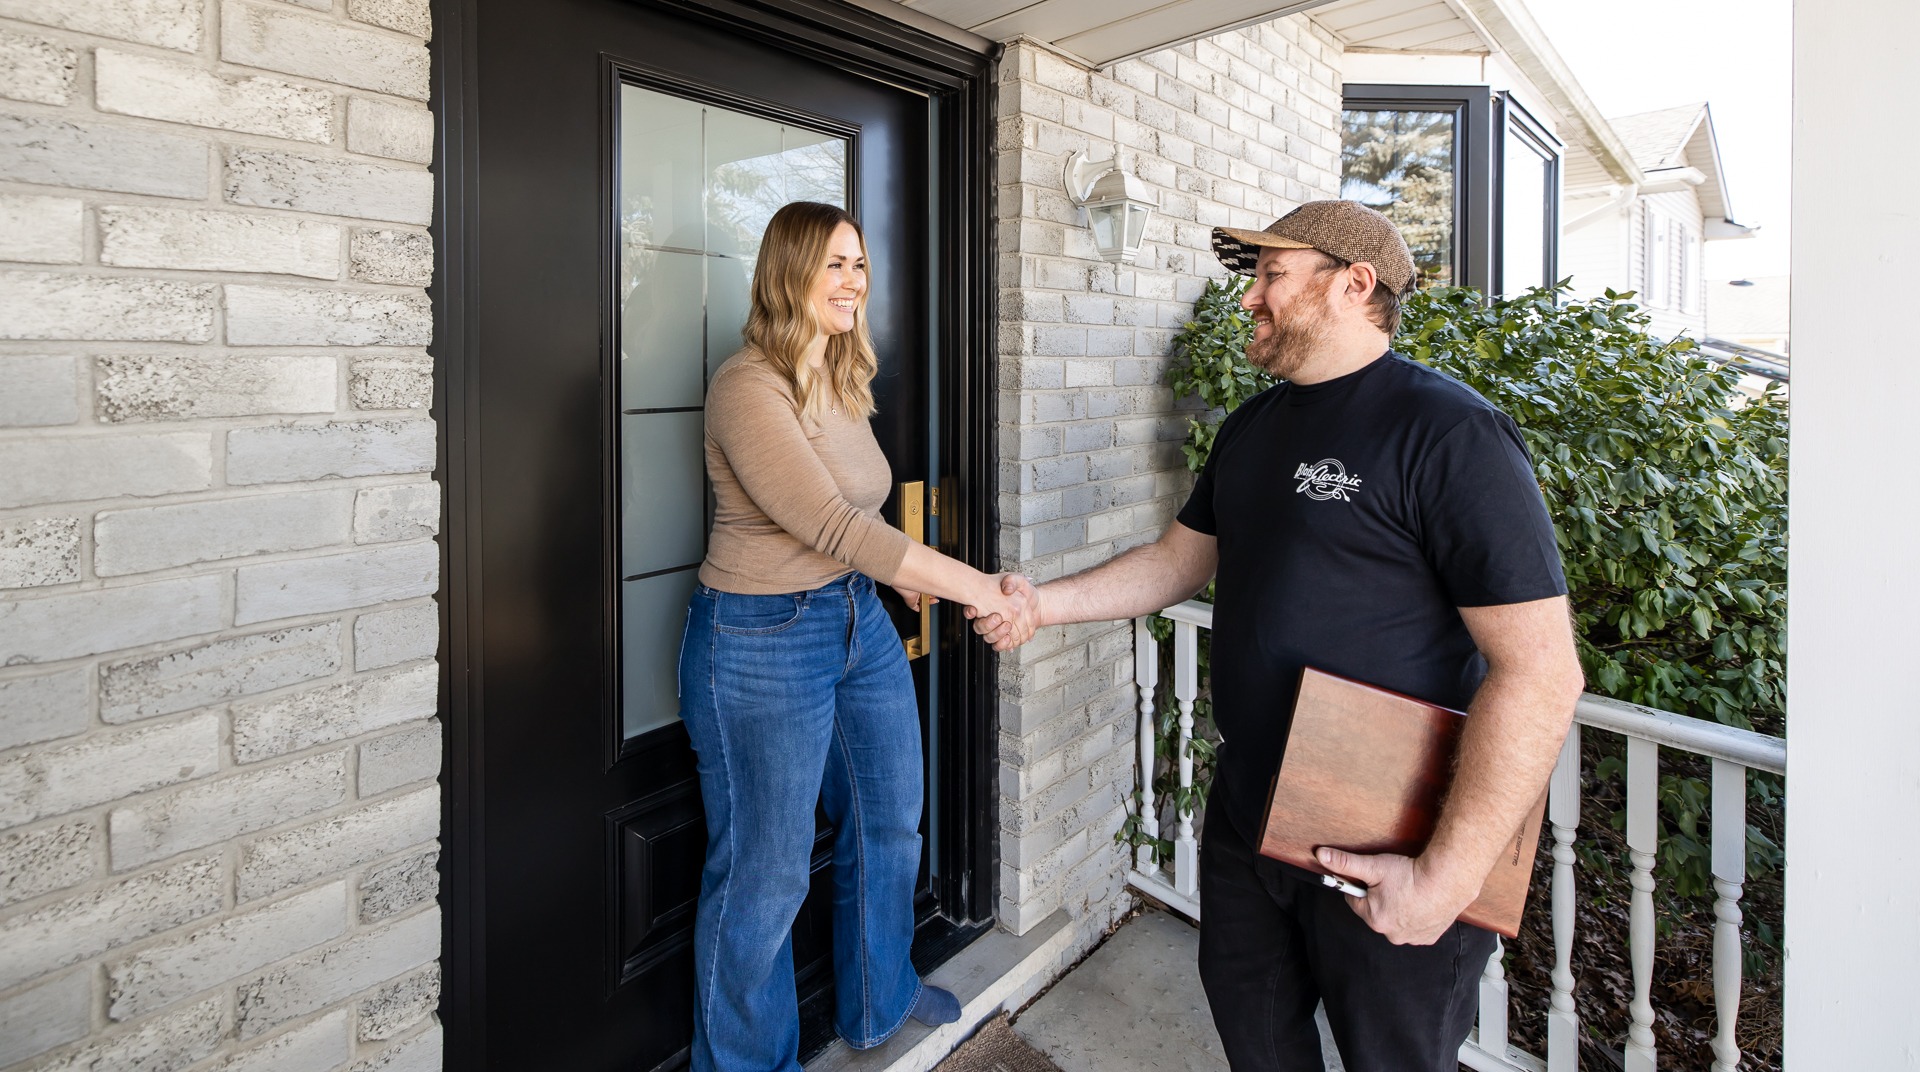 A person is greeting another at the front door; they are shaking hands, smiling, with bright daylight illuminating a residential entrance.